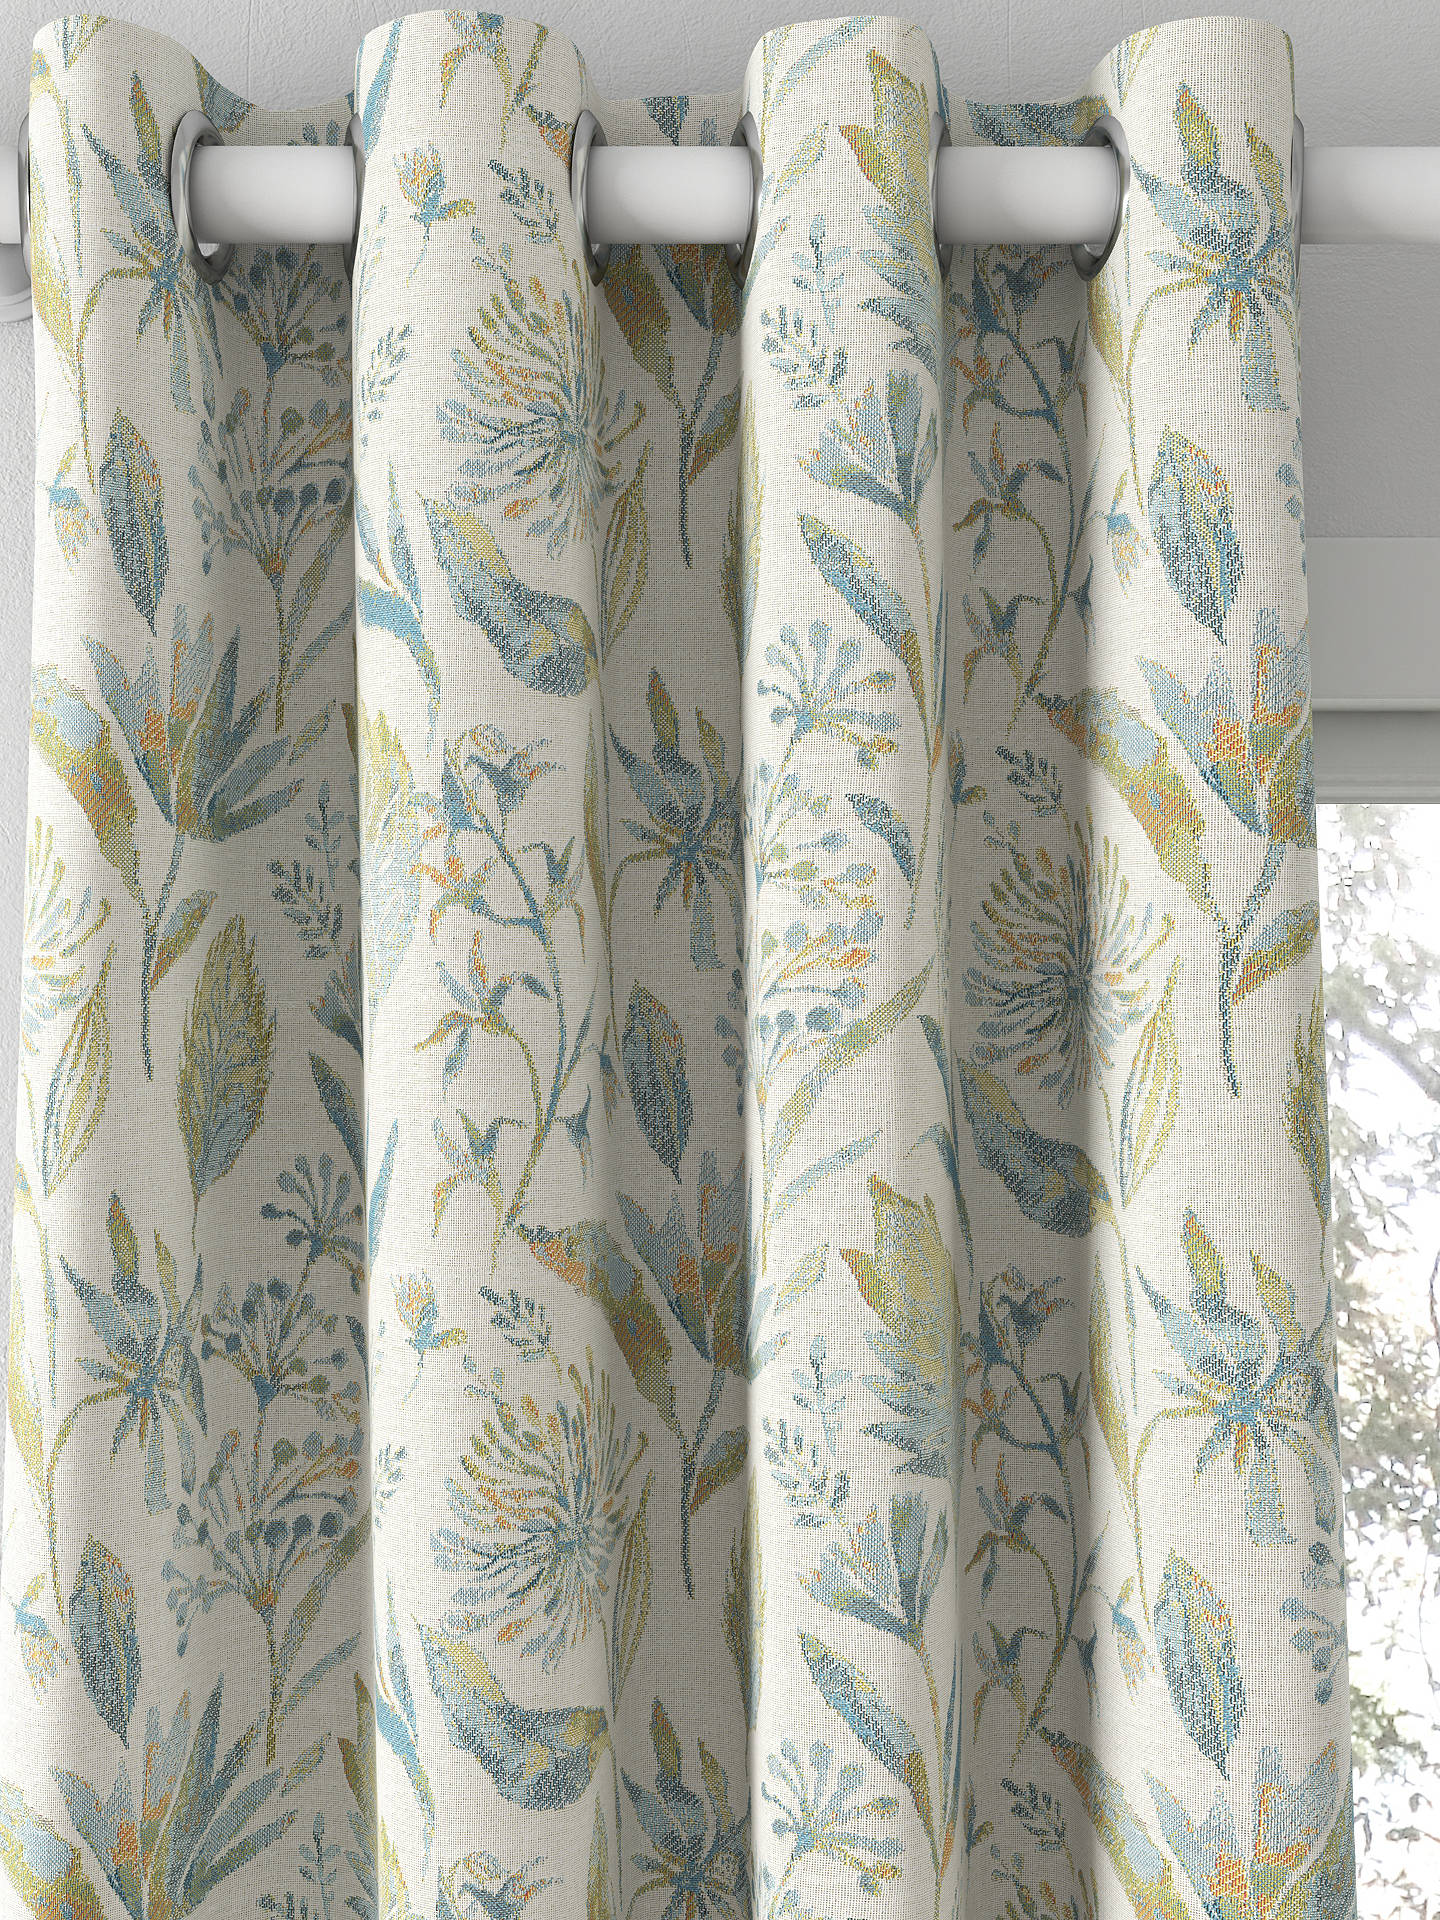 Voyage Elder Made to Measure Curtains, Sky